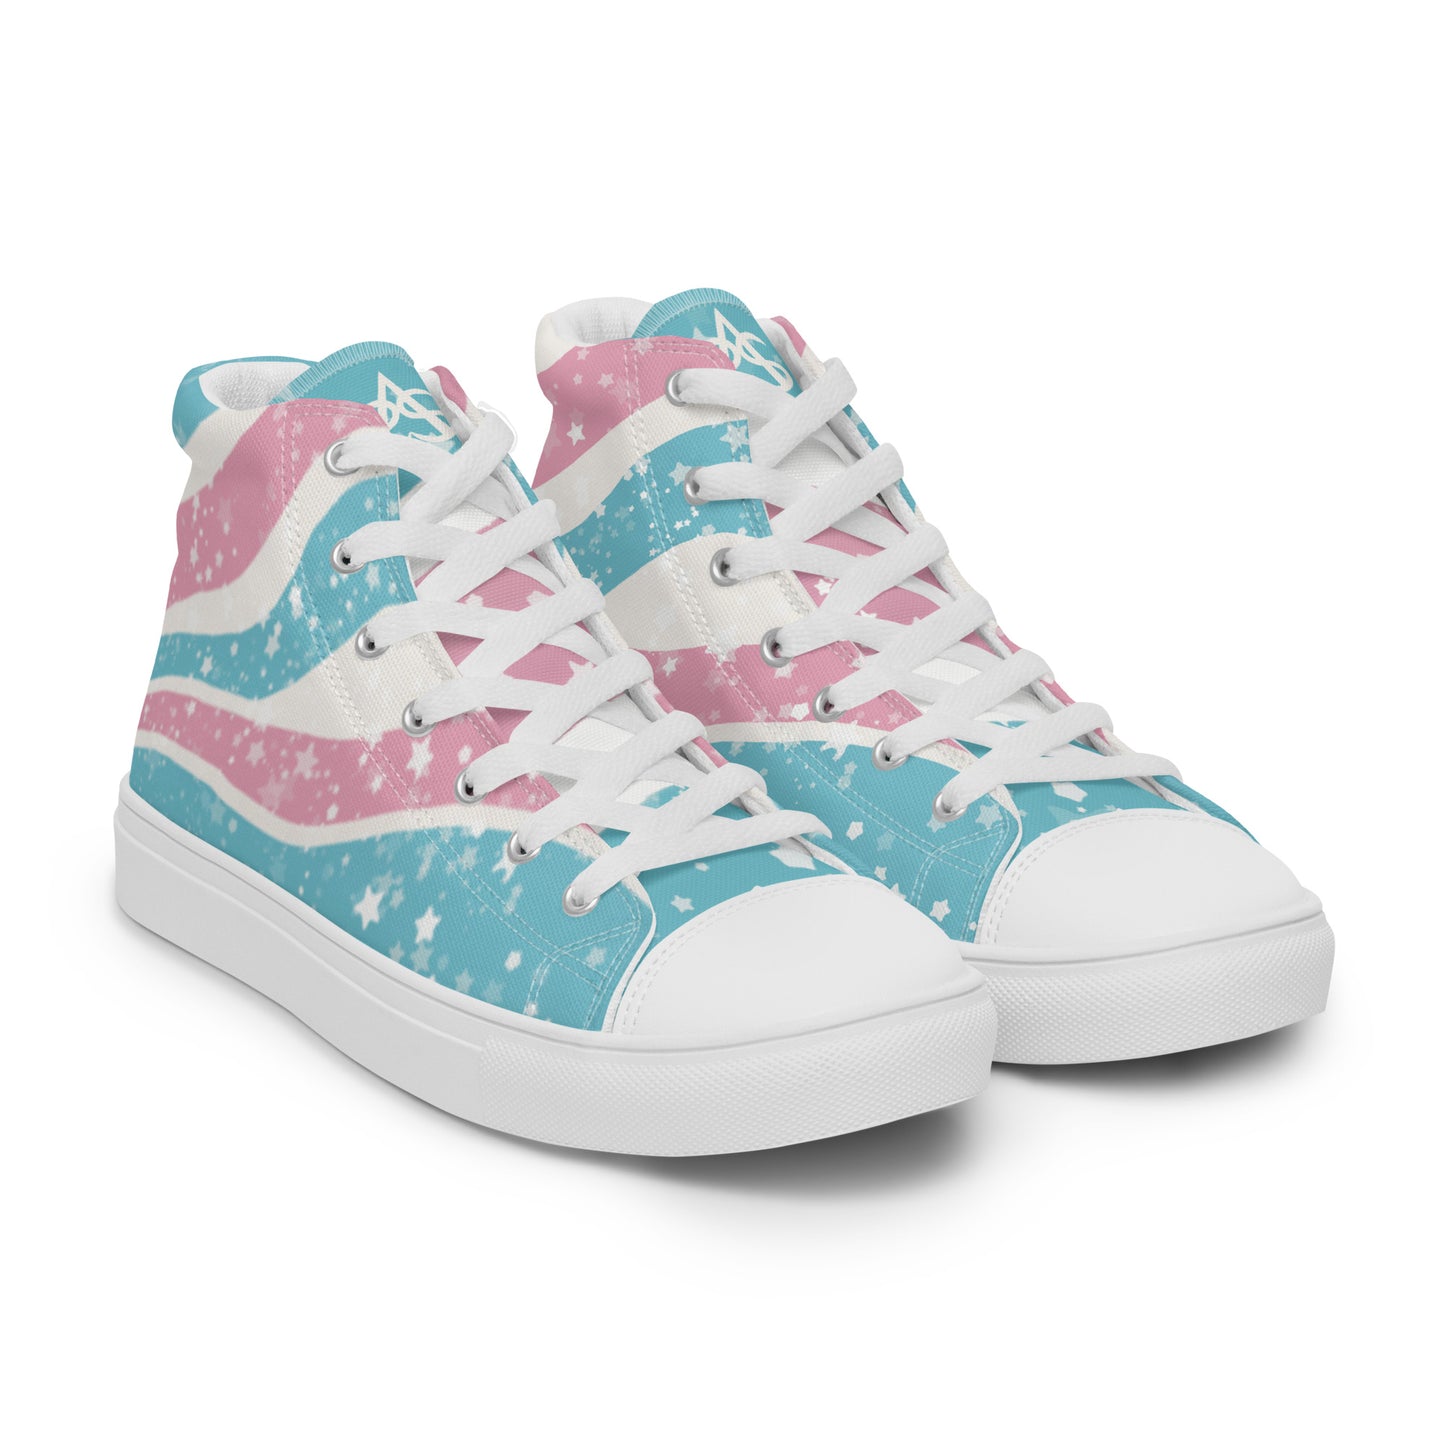 Right front view: A pair of high top shoes have way lines starting from the heel and getting larger towards the laces in pink, white, and blue with white stars all over, white laces, and white details.